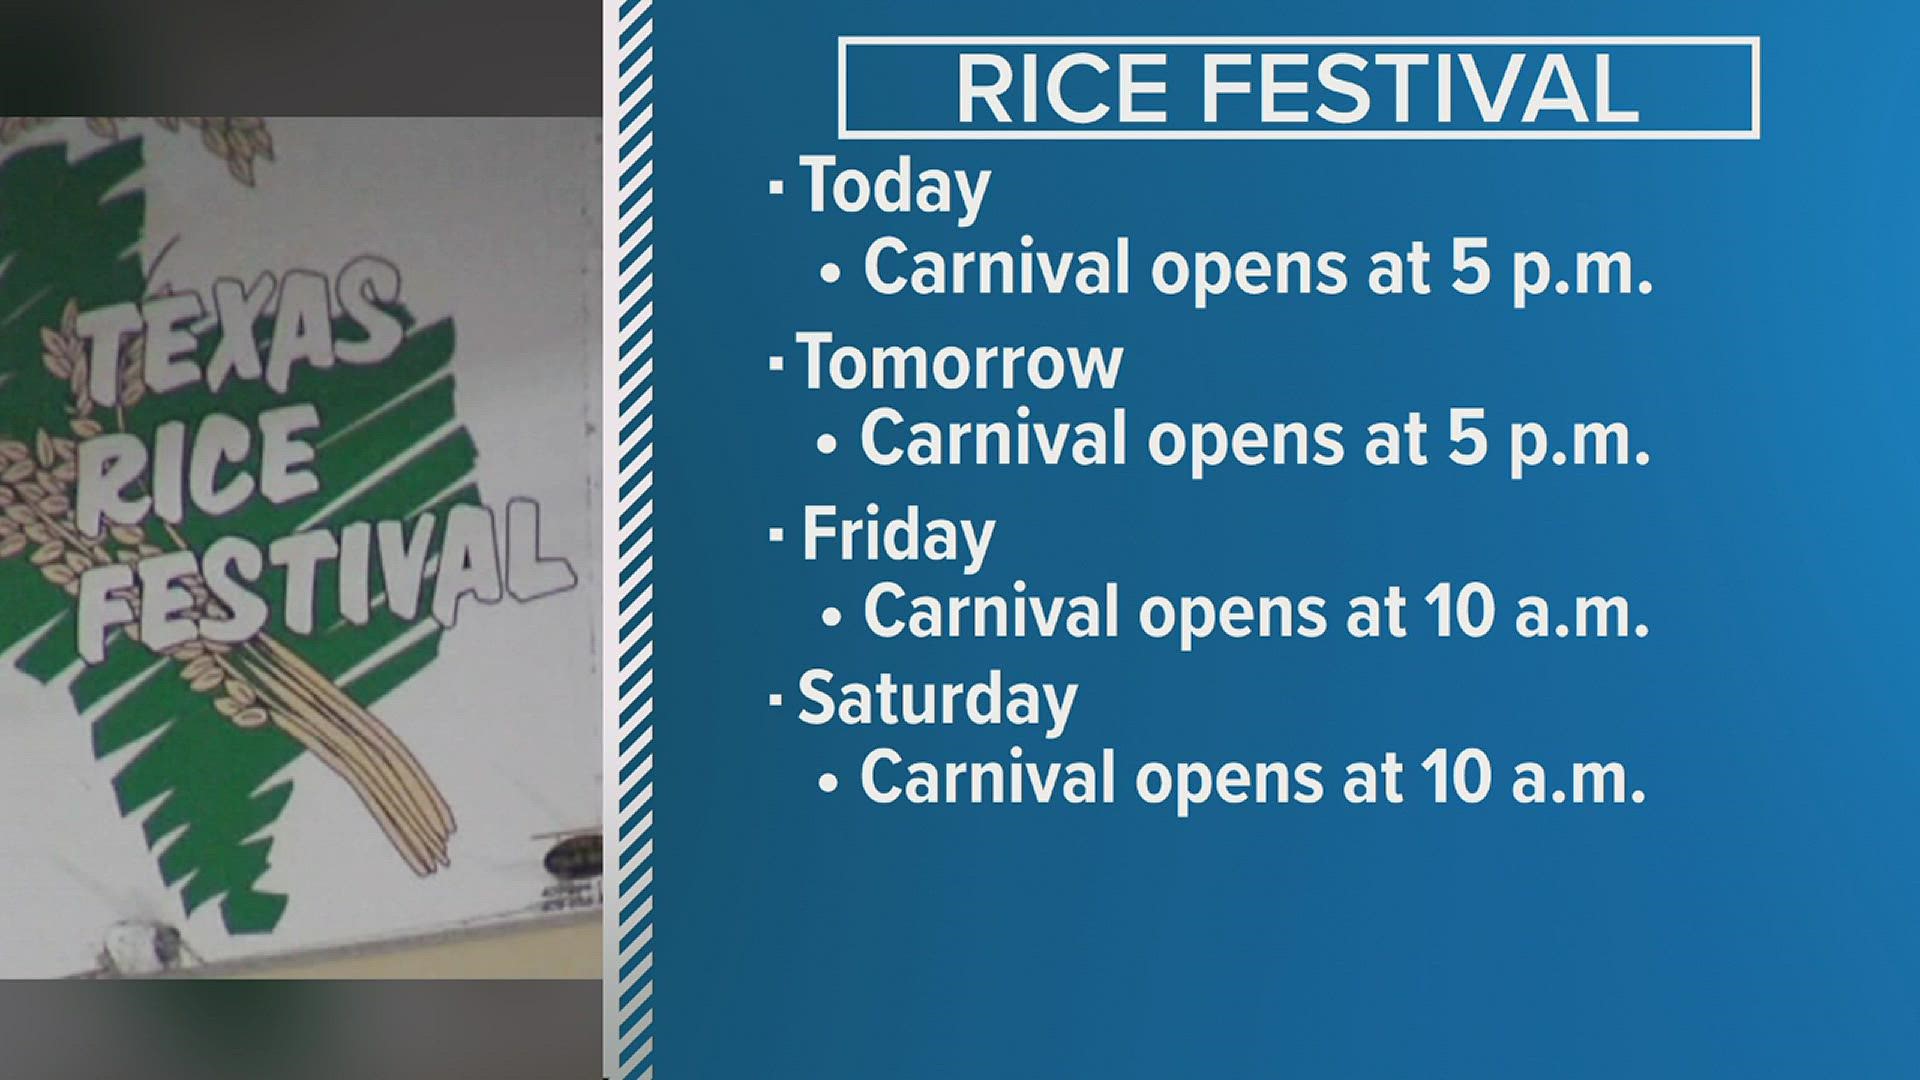 The Texas Rice Festival runs from Wednesday, September 28 to Saturday, October 1.